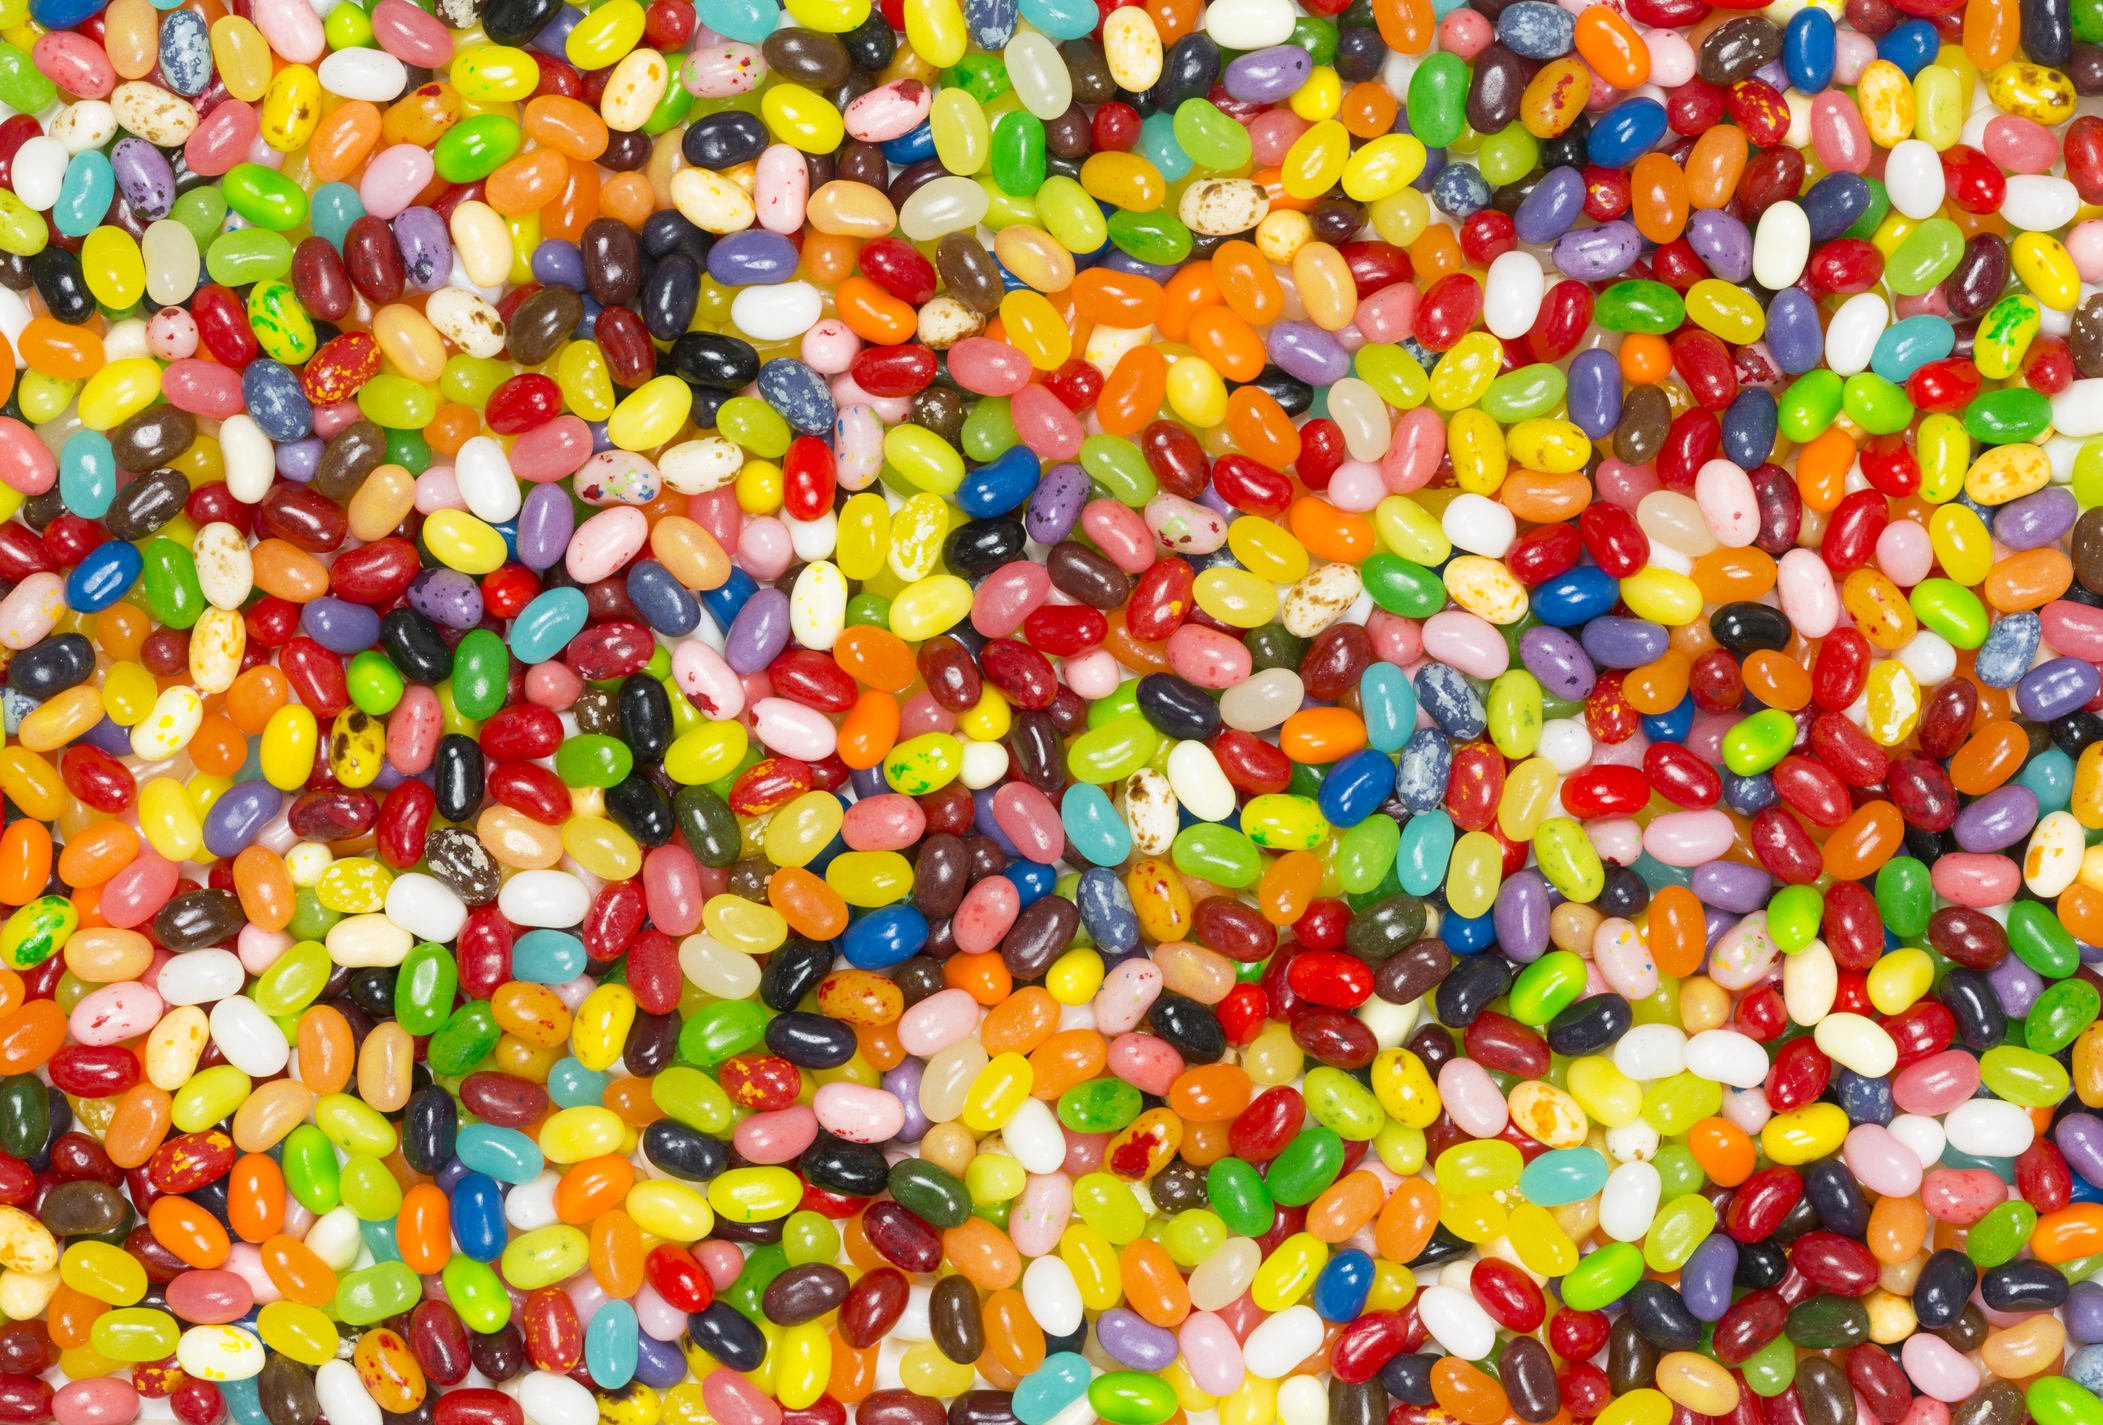 Jelly Belly Creator Joins Weed Game with New CBD Candy